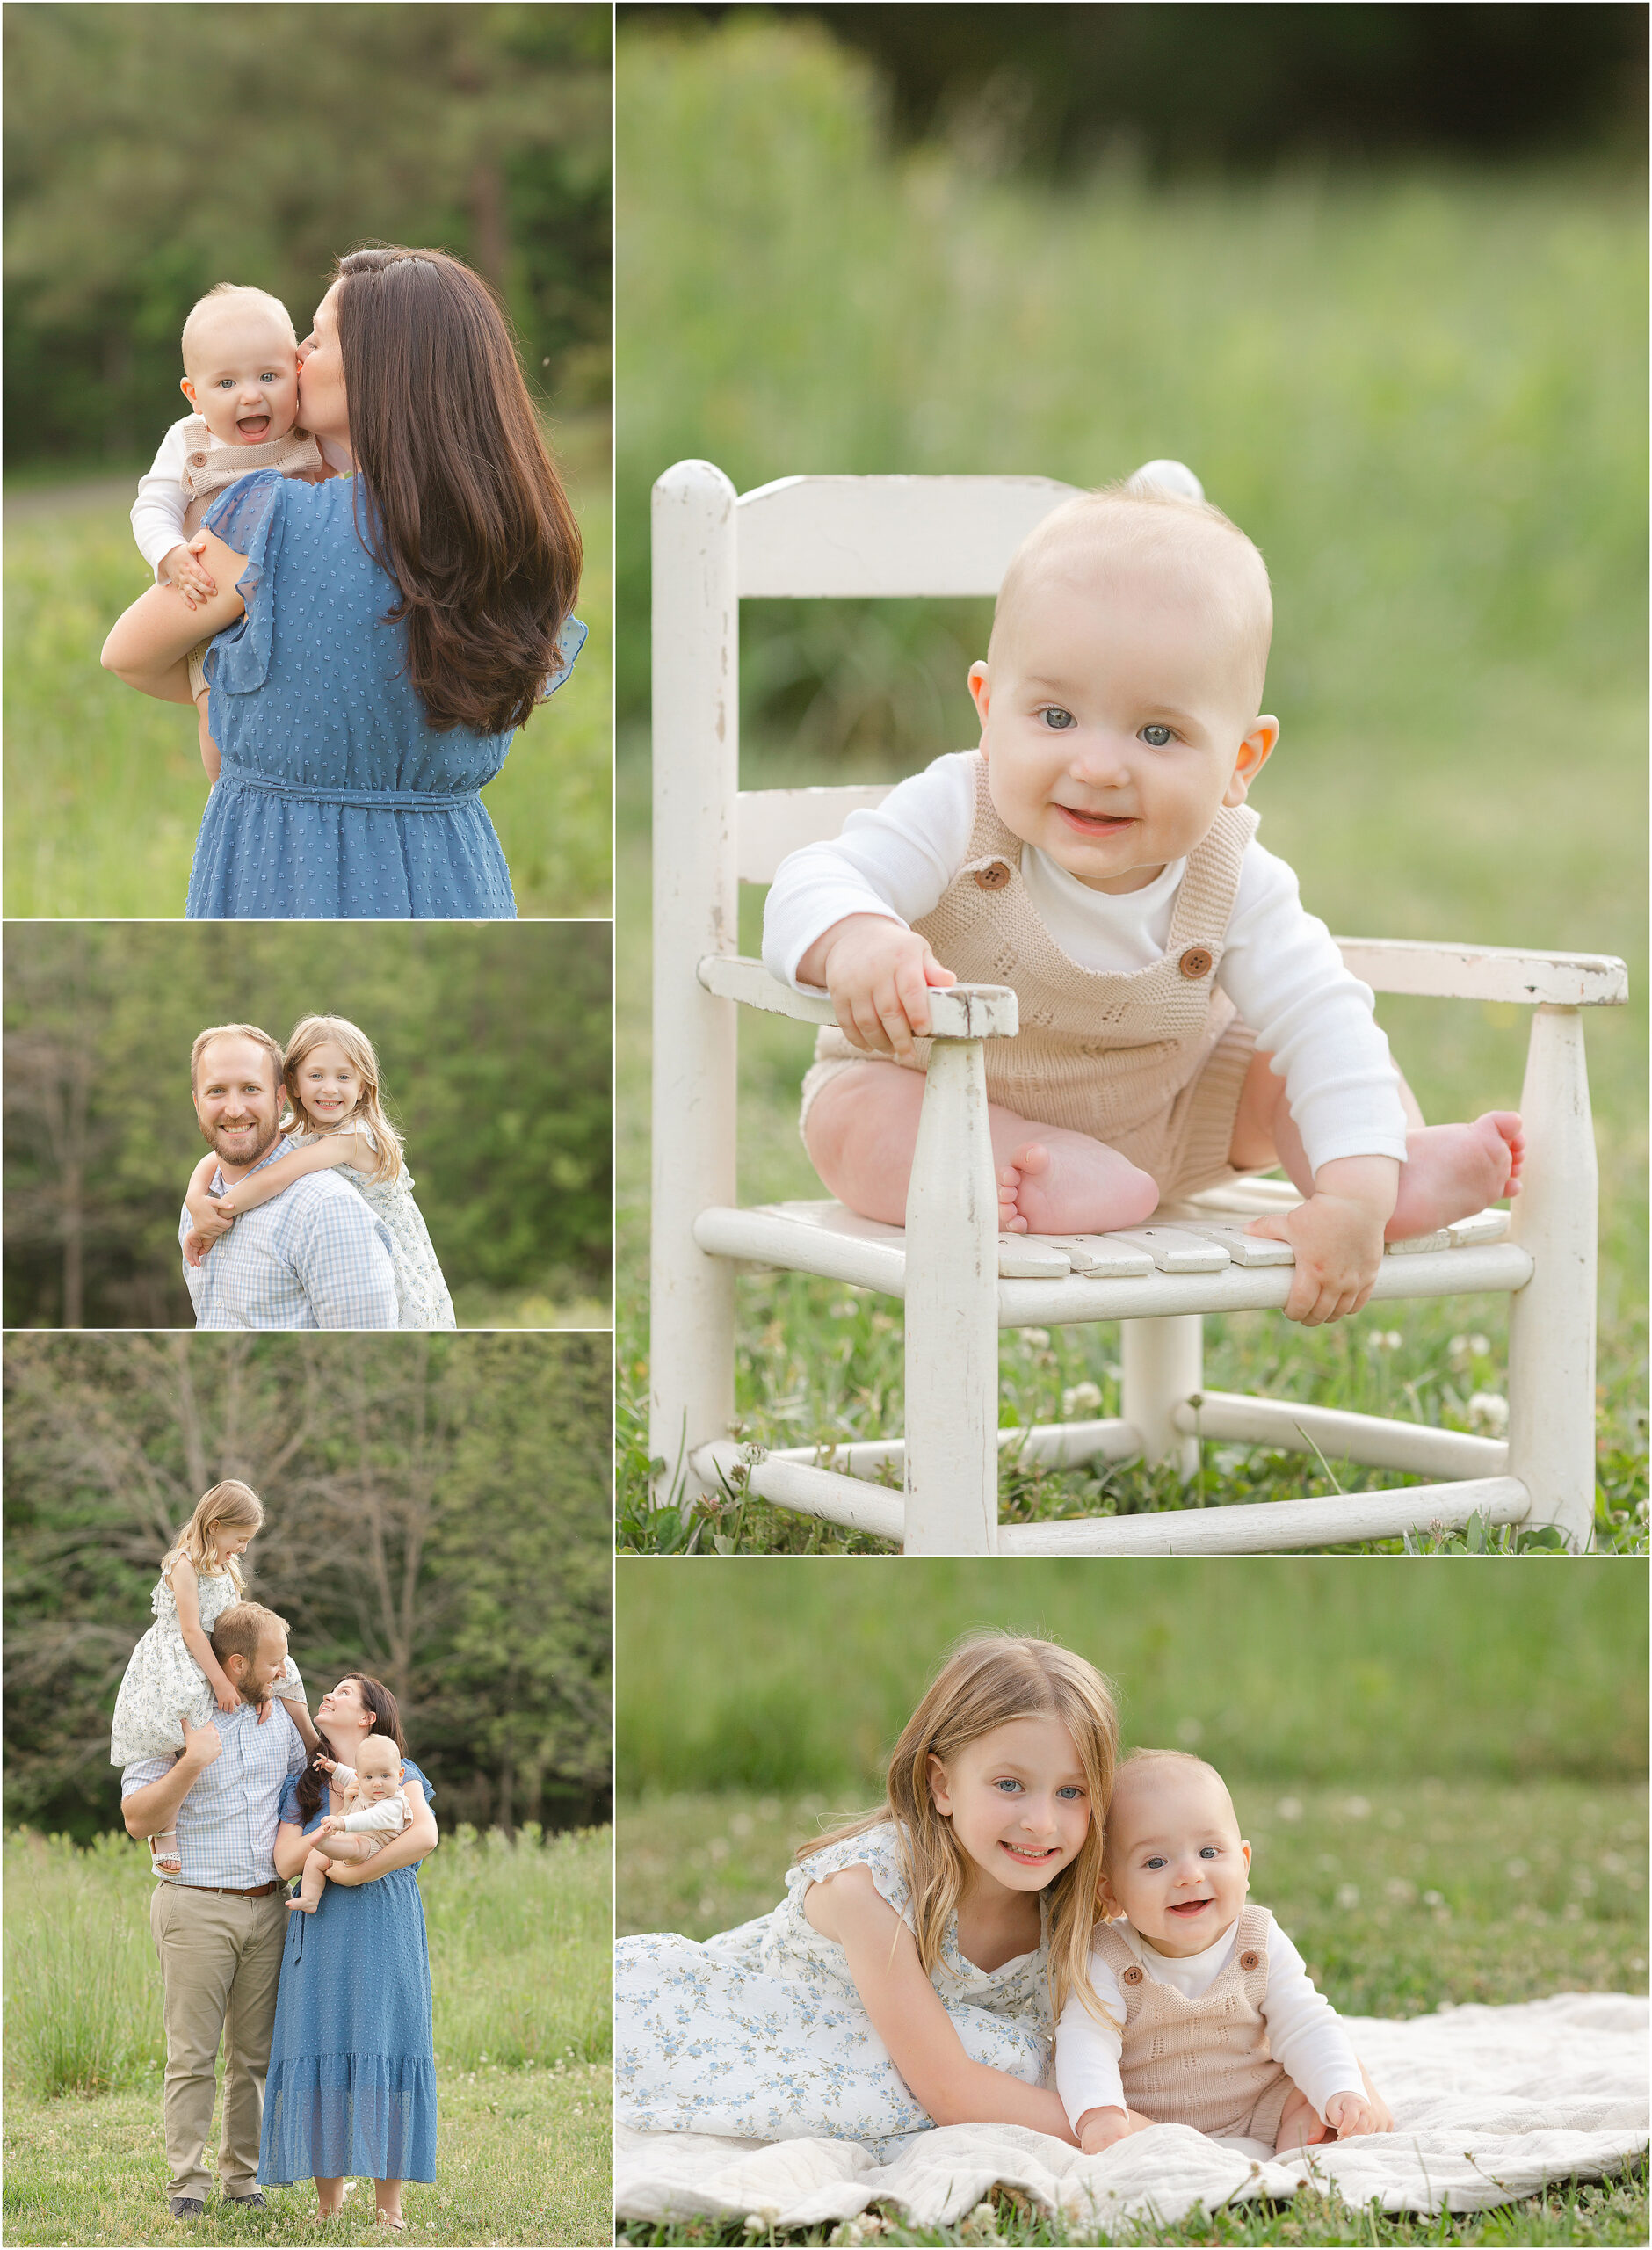 Collage of photos of a six month old baby boy and his family outside in the spring